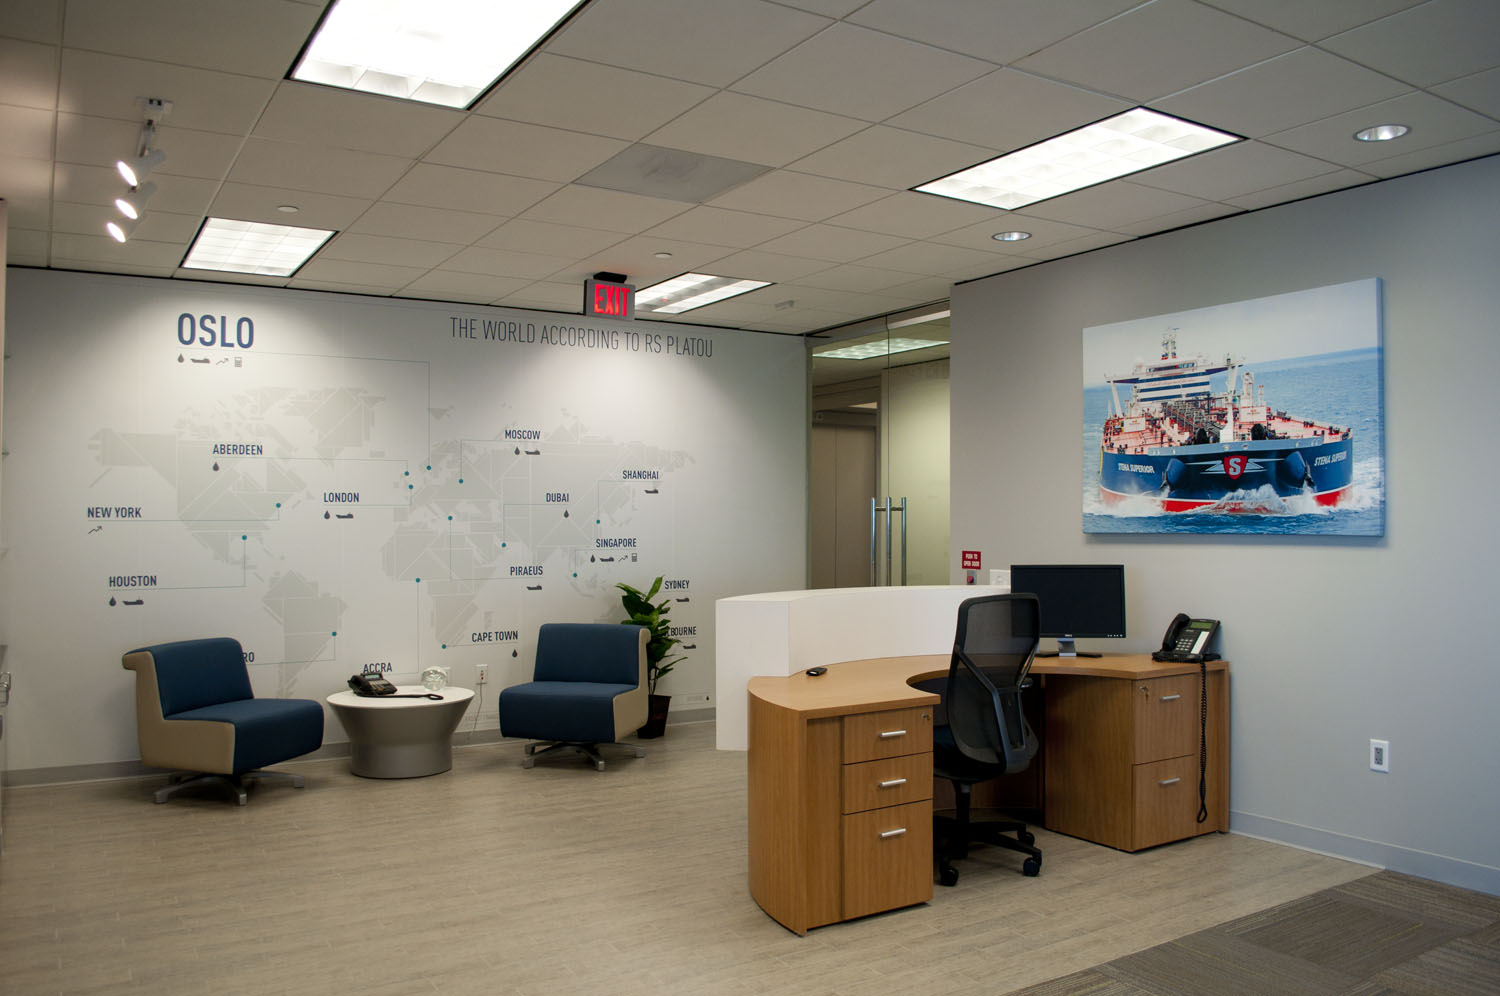 Custom World Map showing Company's Worldwide Office Locations - Reception Area Wall Paper Graphics 